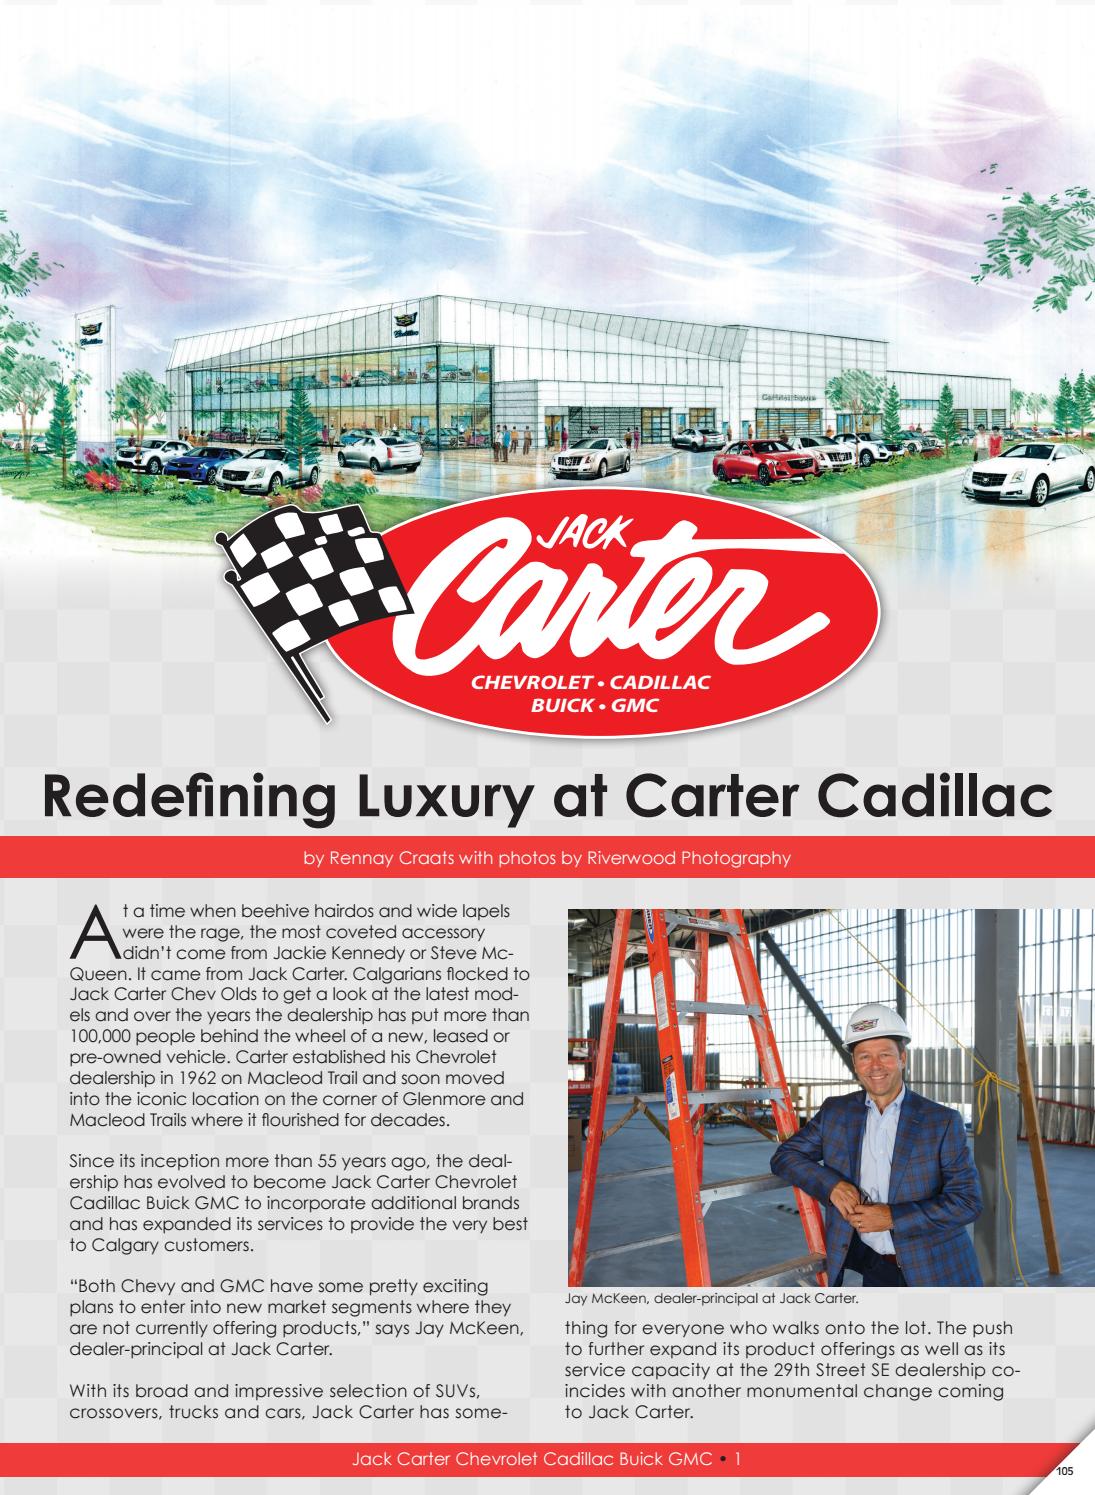 Business in Calgary Magazine - Business Profile for Jack Carter Cadillac